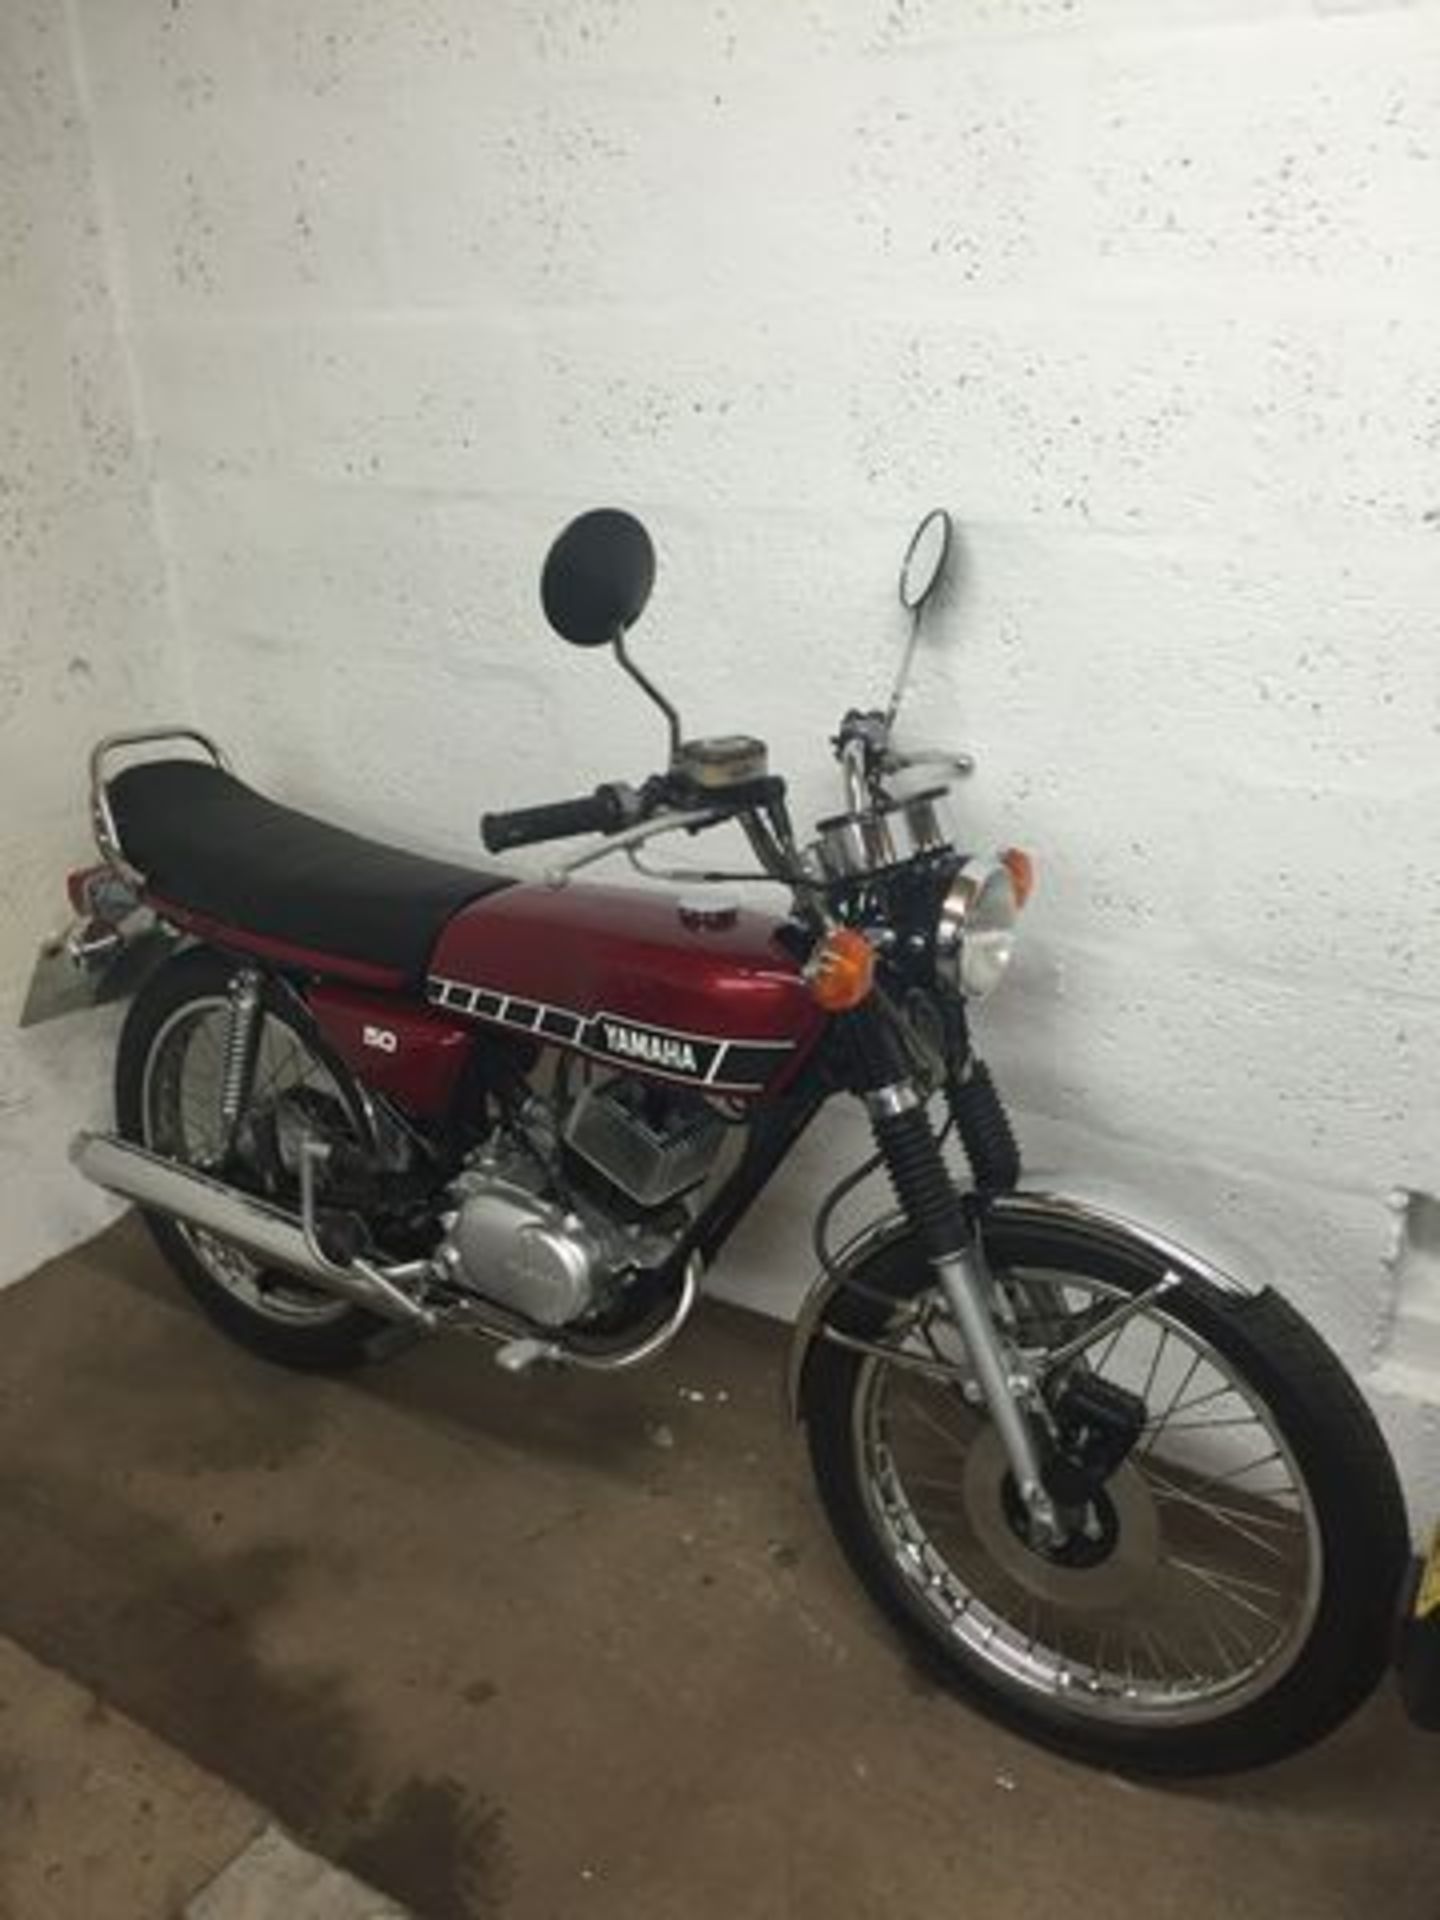 YAMAHA, RD50M - 49cc, Frame number 2L5004355 - this example is a French import registered in the